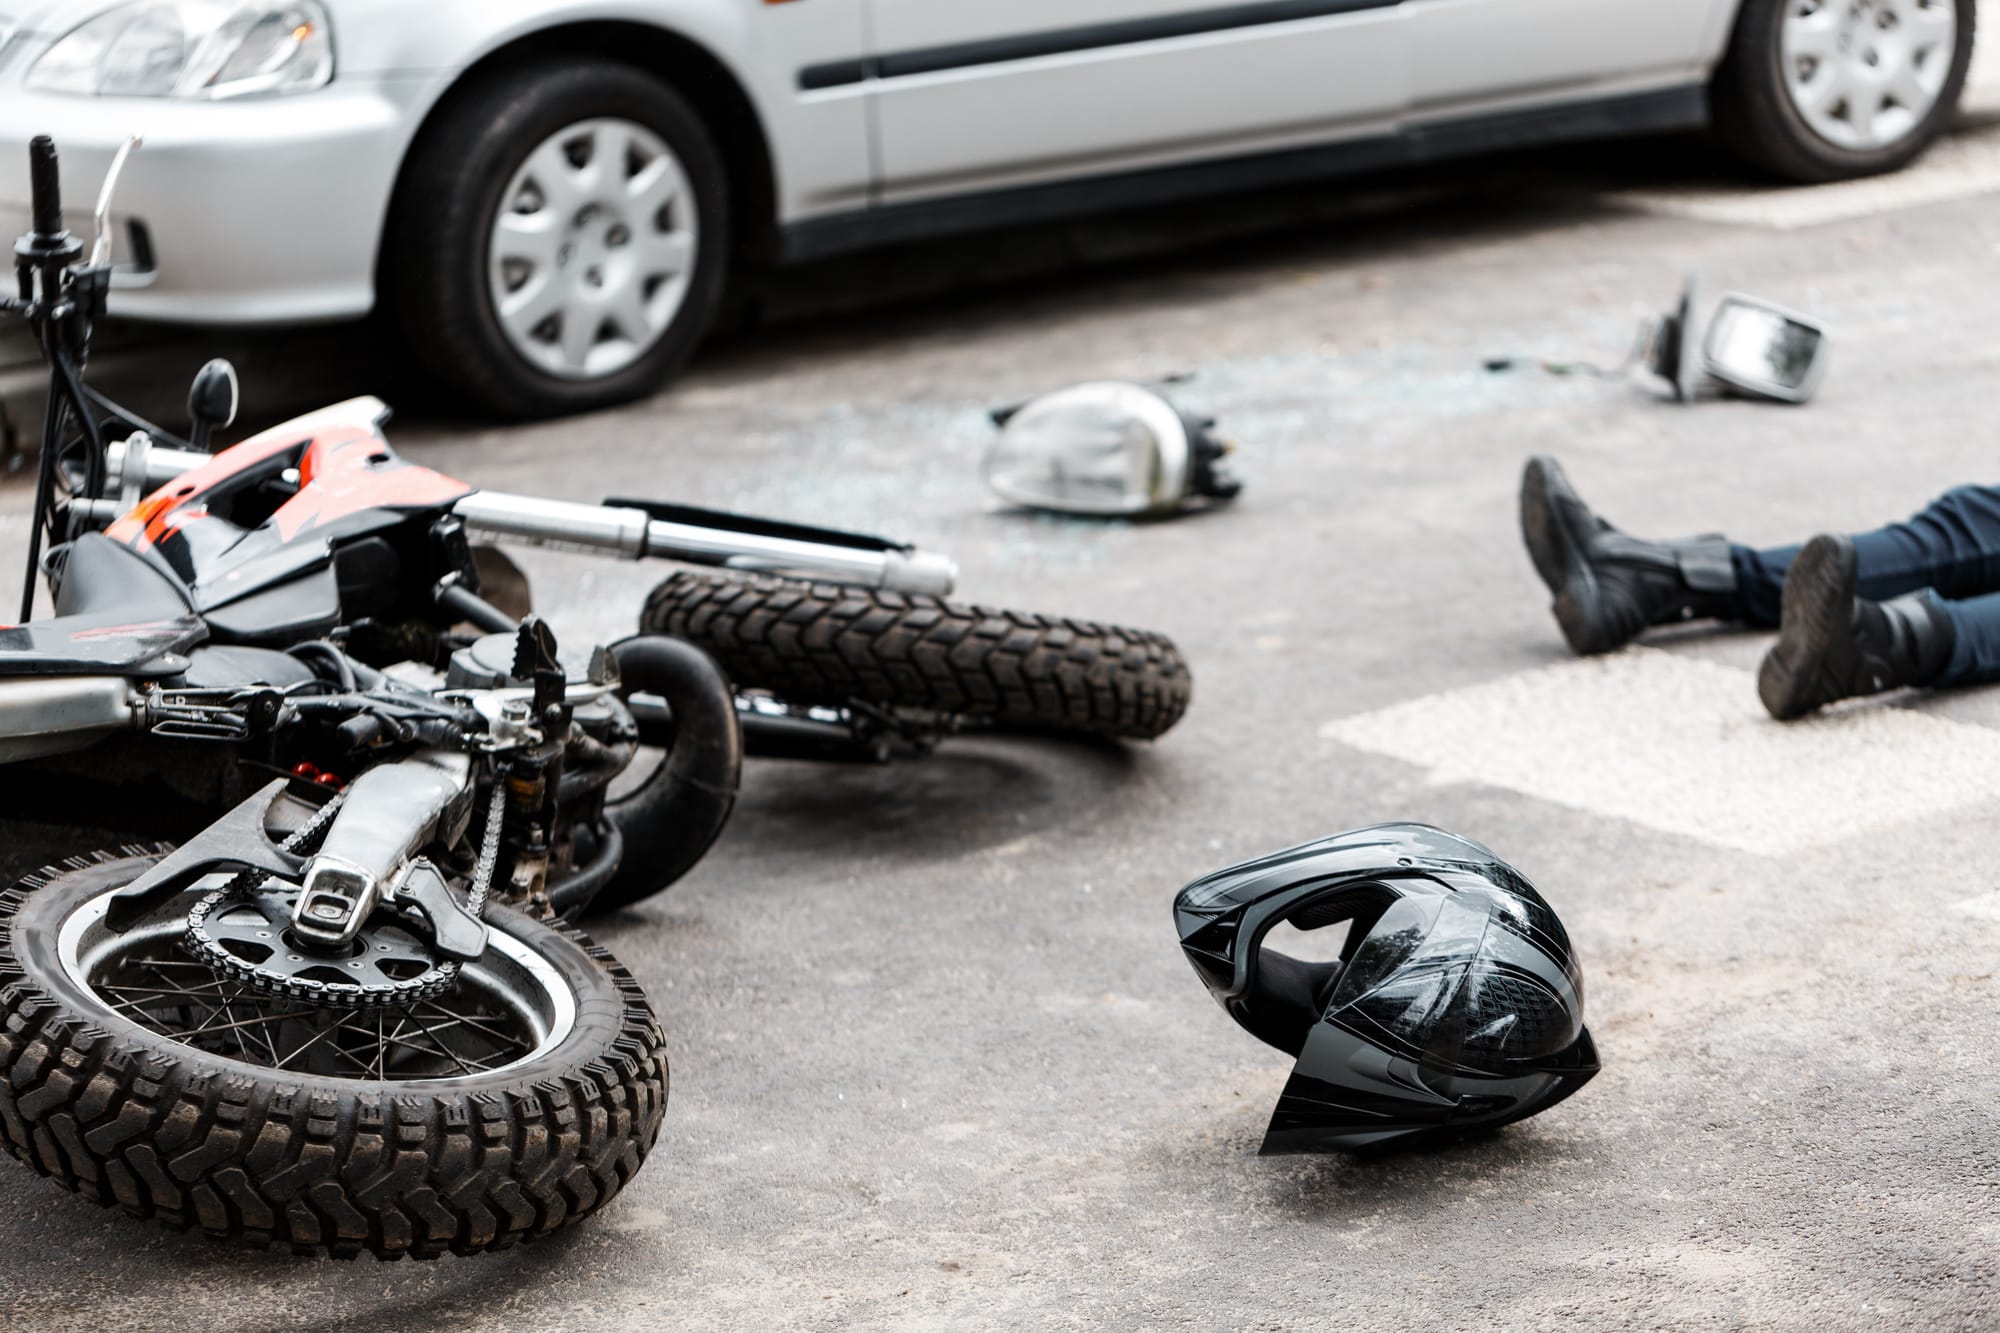 Legs of person lying on the road in the photo of motorcycle and car accident